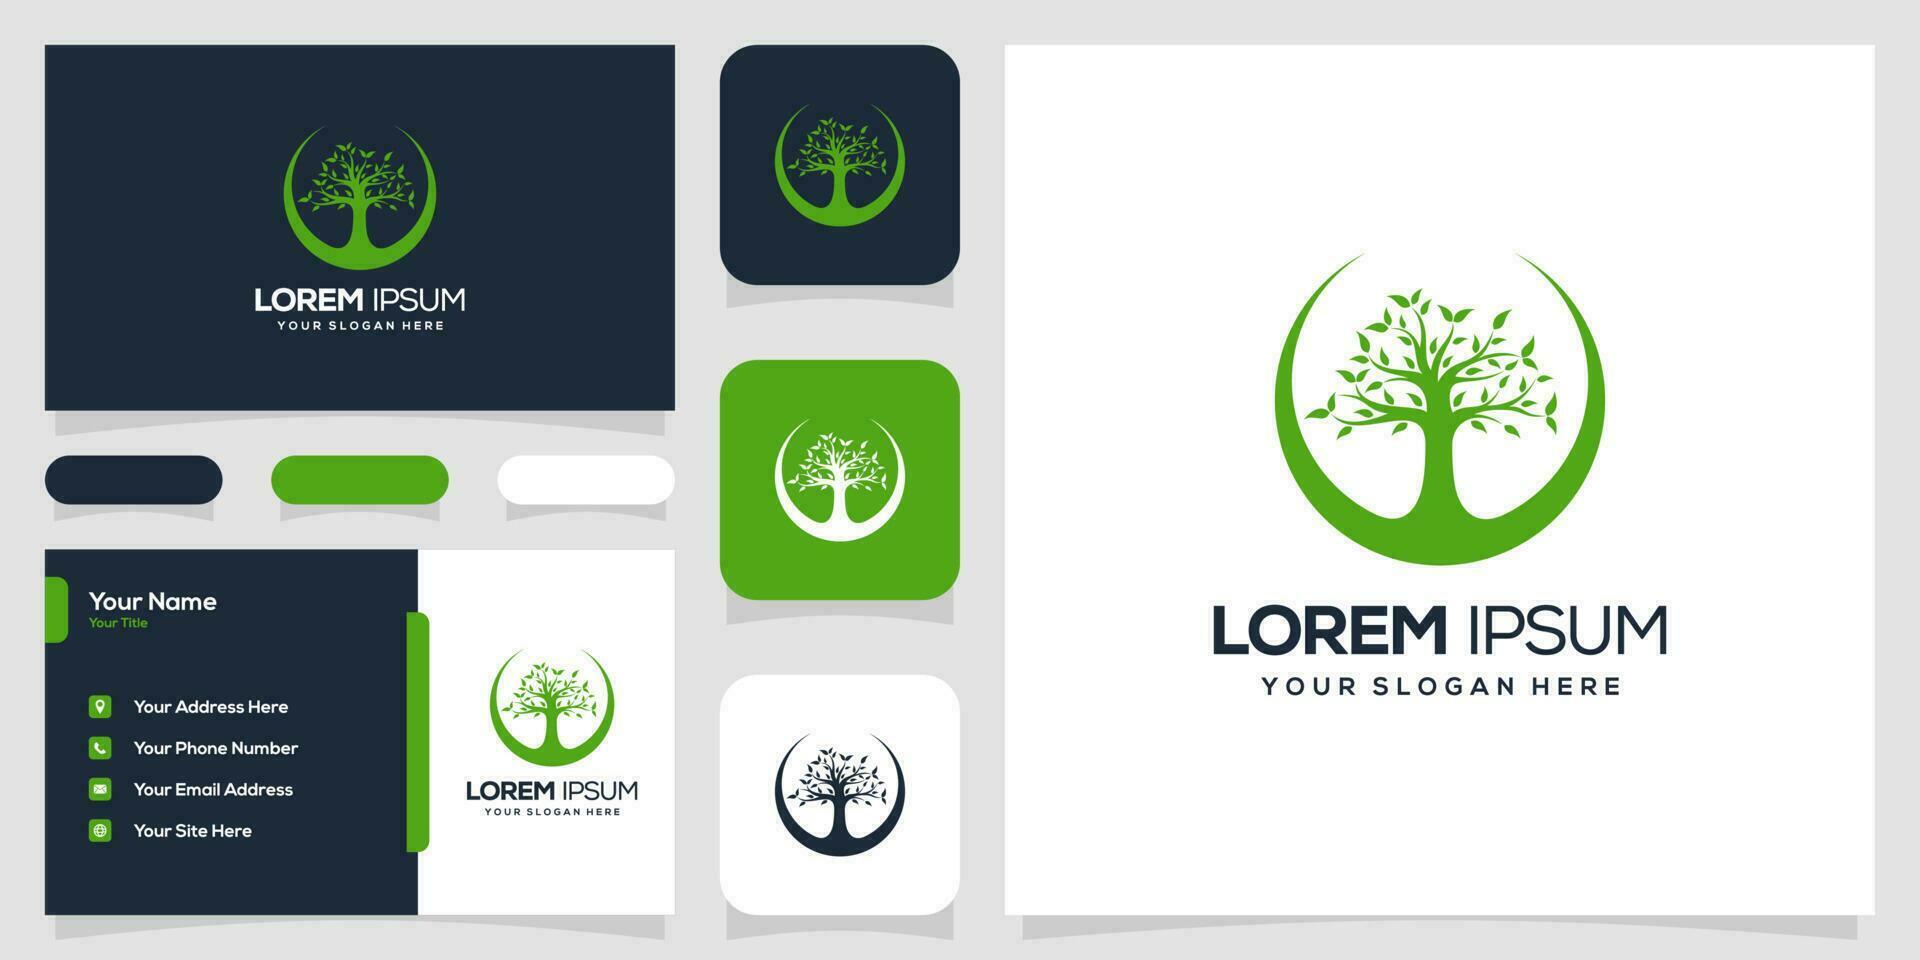 a green business card and logo vector